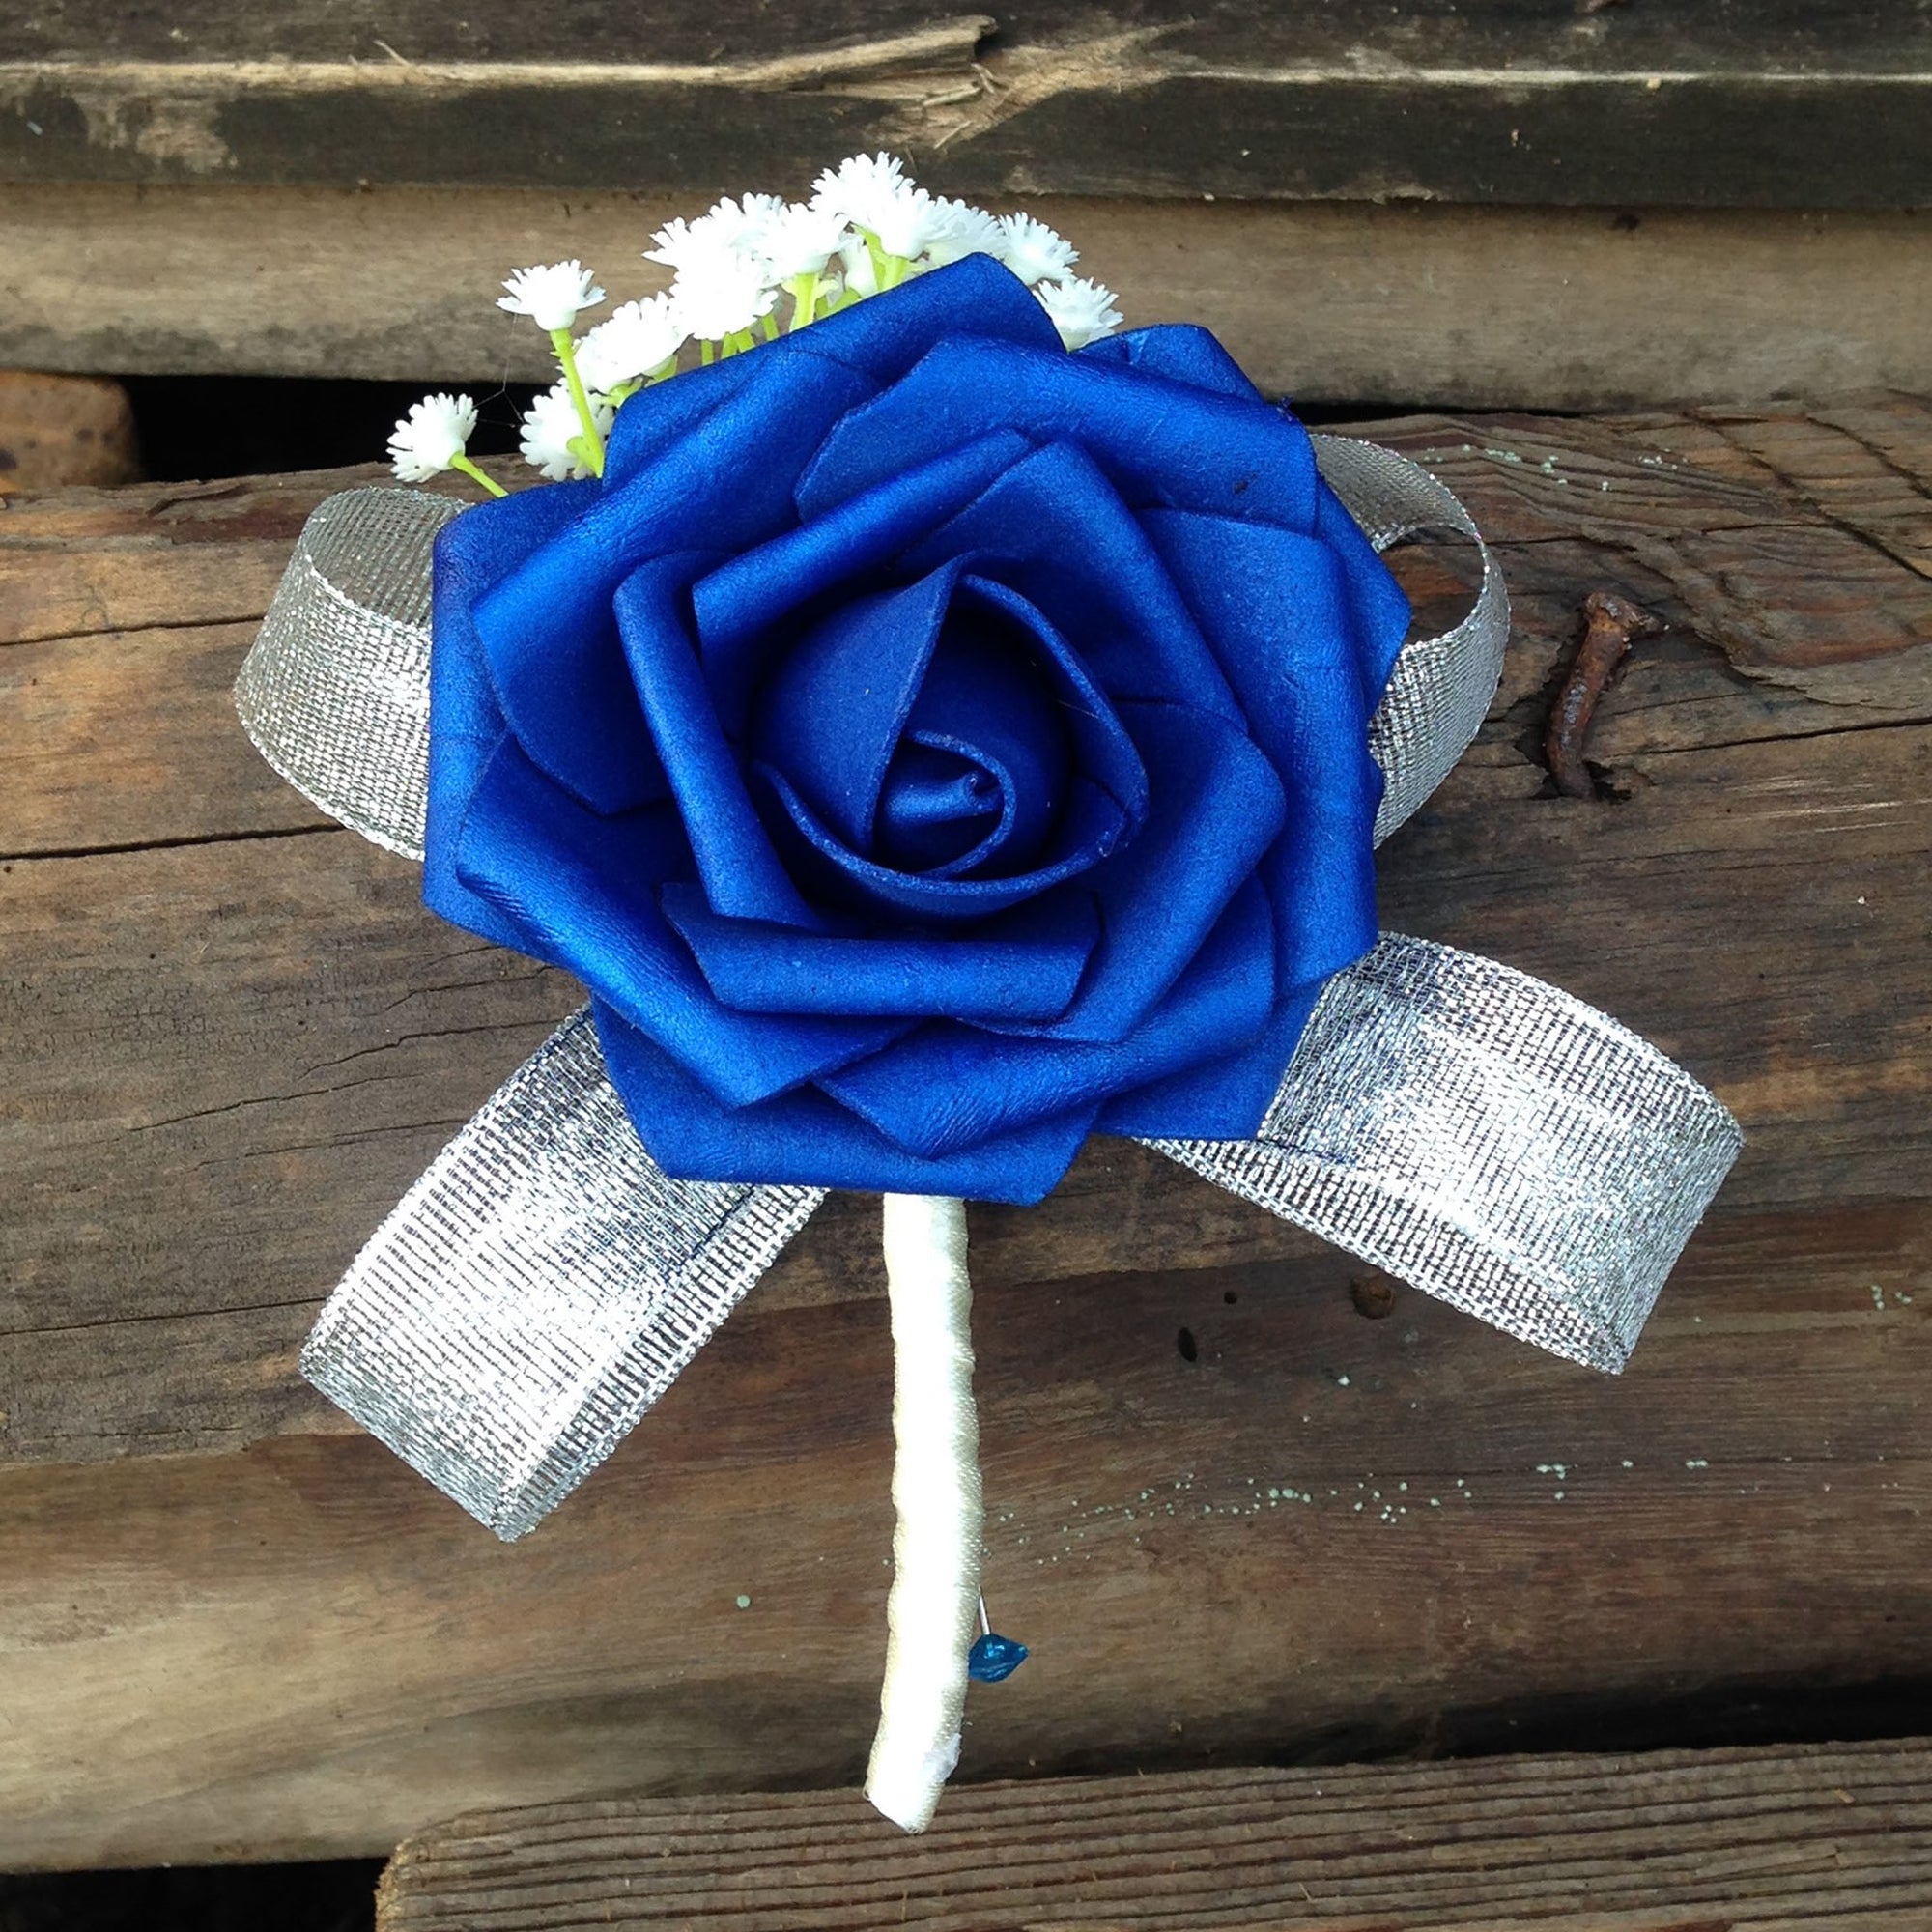 Royal Blue Ivory Roses Wedding Bouquets for Bridal Bridesmaids Boutonnieres